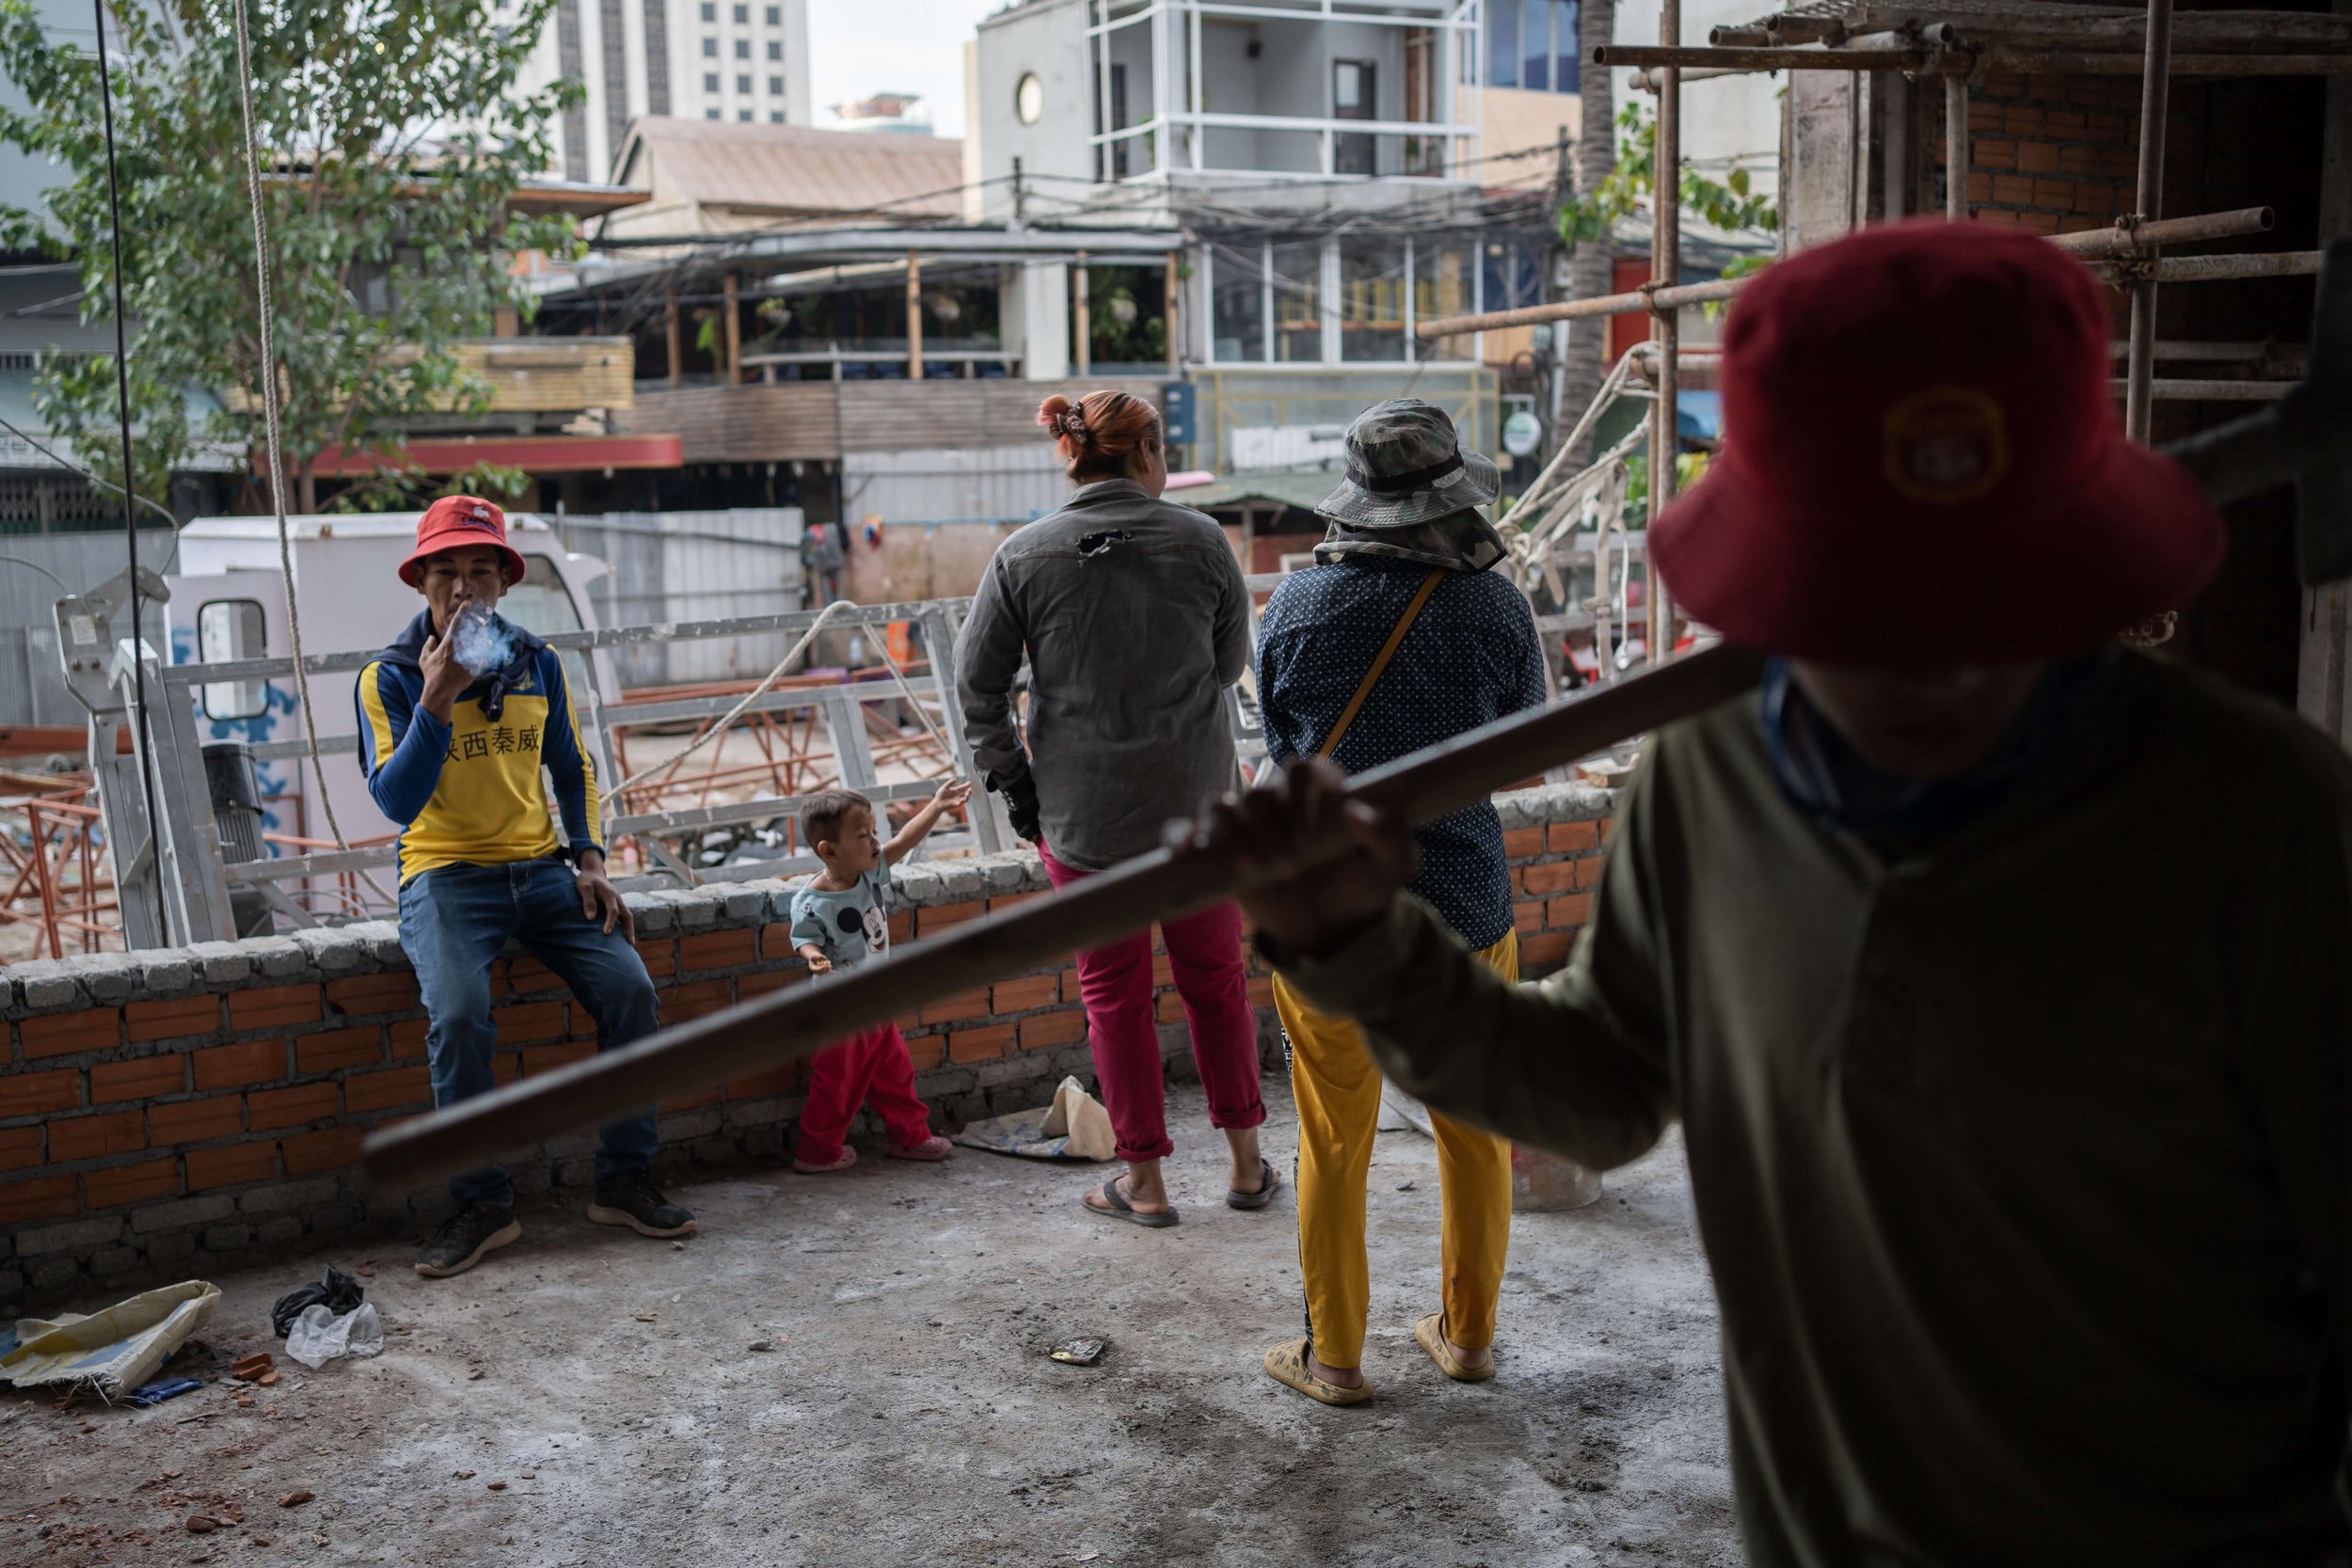  Srieng takes a smoke break with his son and other construction workers on the site. With no other option, his 2-year-old son spends most of his time on the site with his parents or other workers. Srieng also has a daughter from his first wife who li